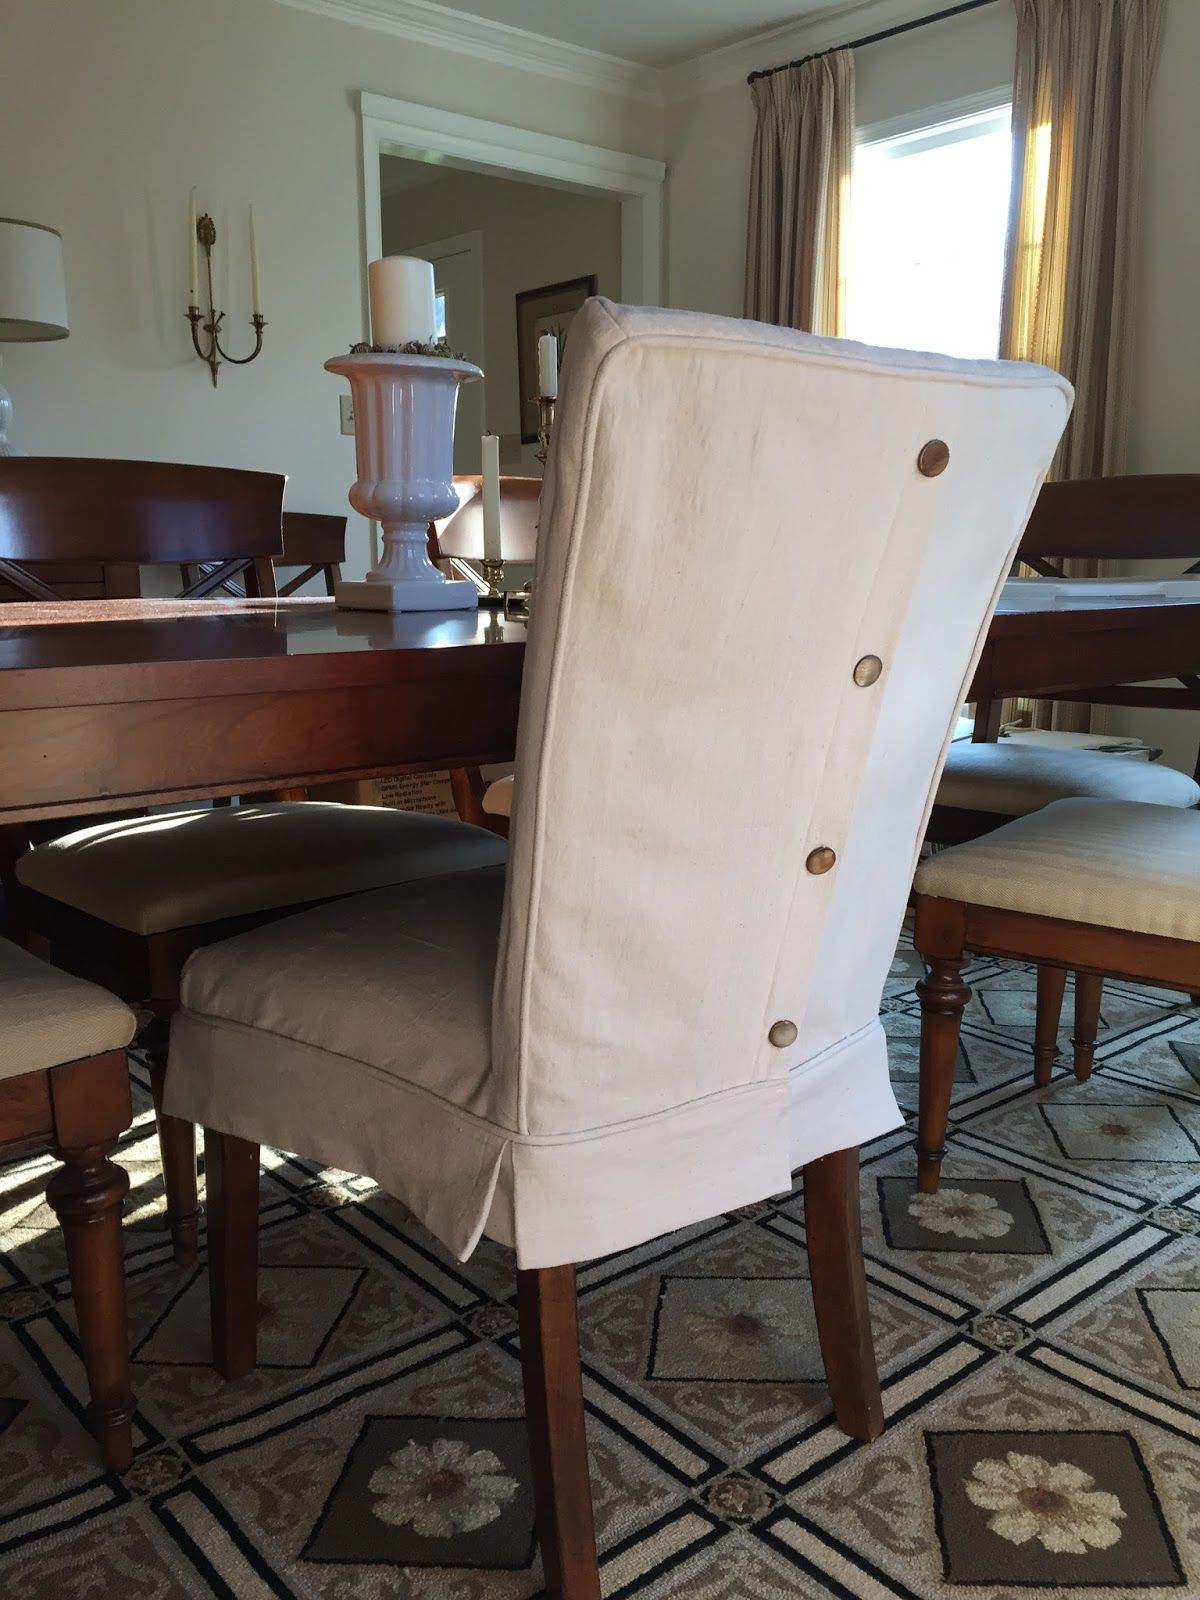 Dining Room Chair Slipcovers